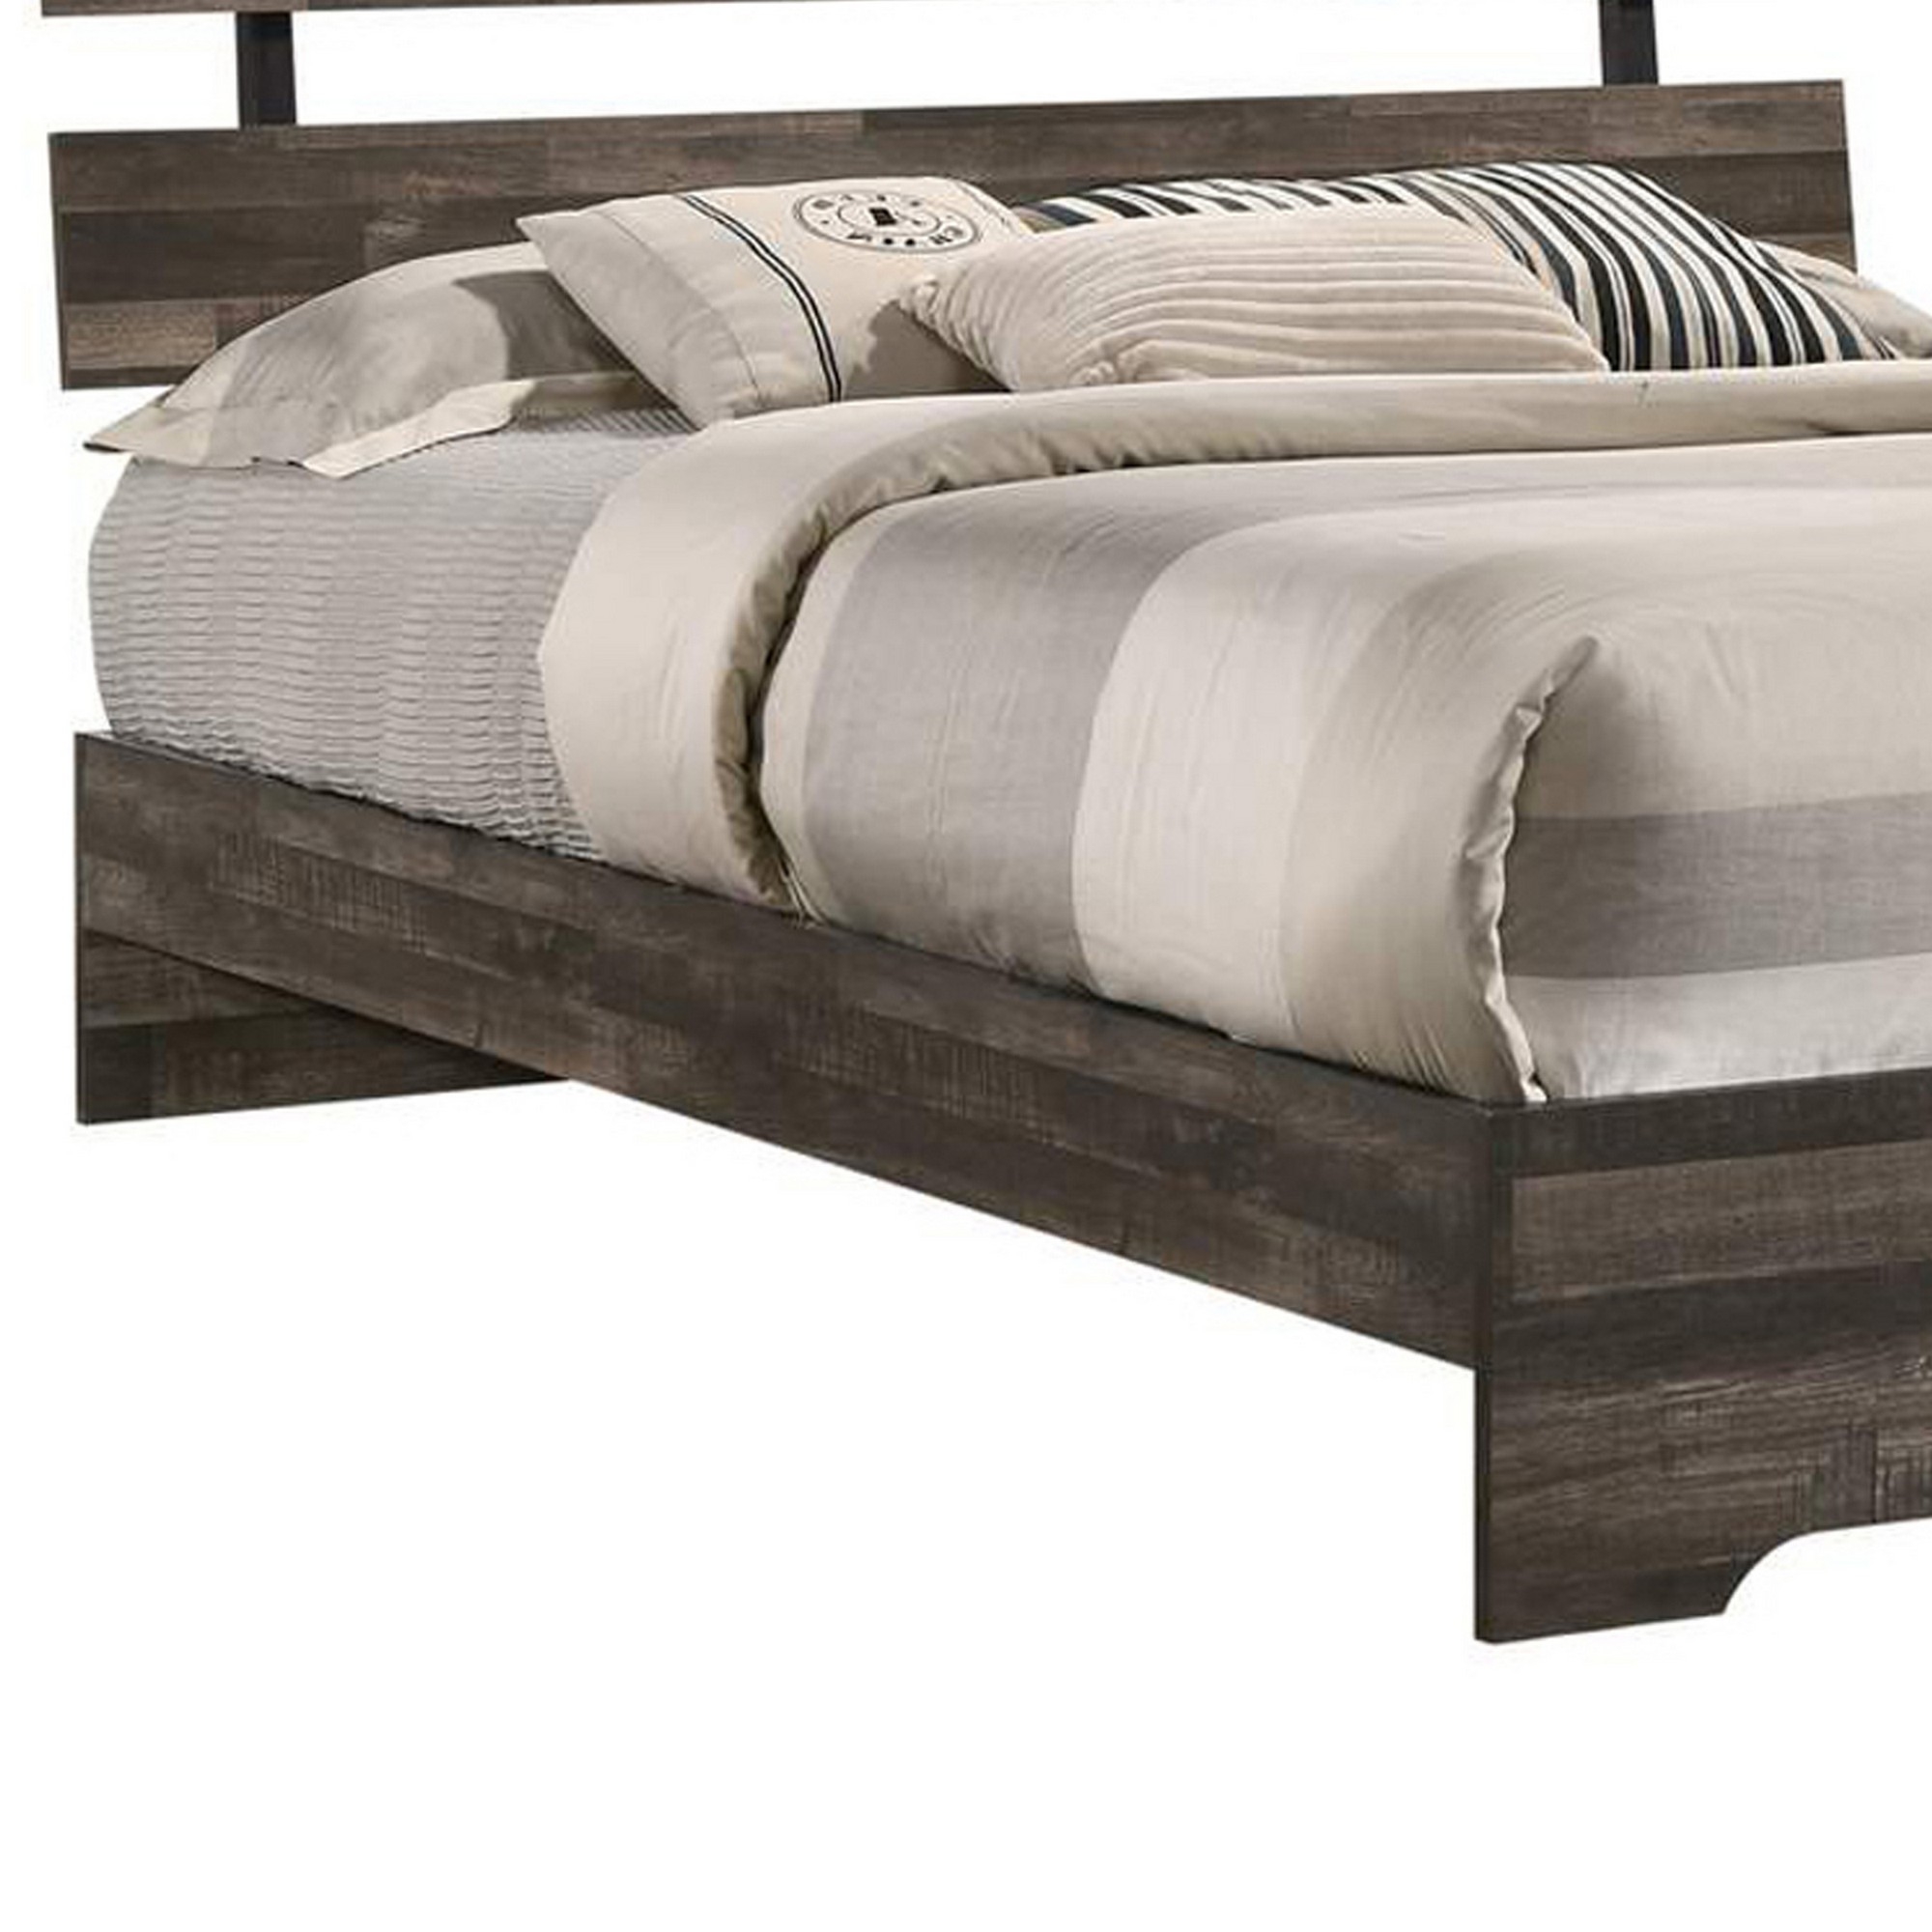 Twin Bed With Rustic Heavy Grain Details And Panel Design, Brown- Saltoro Sherpi